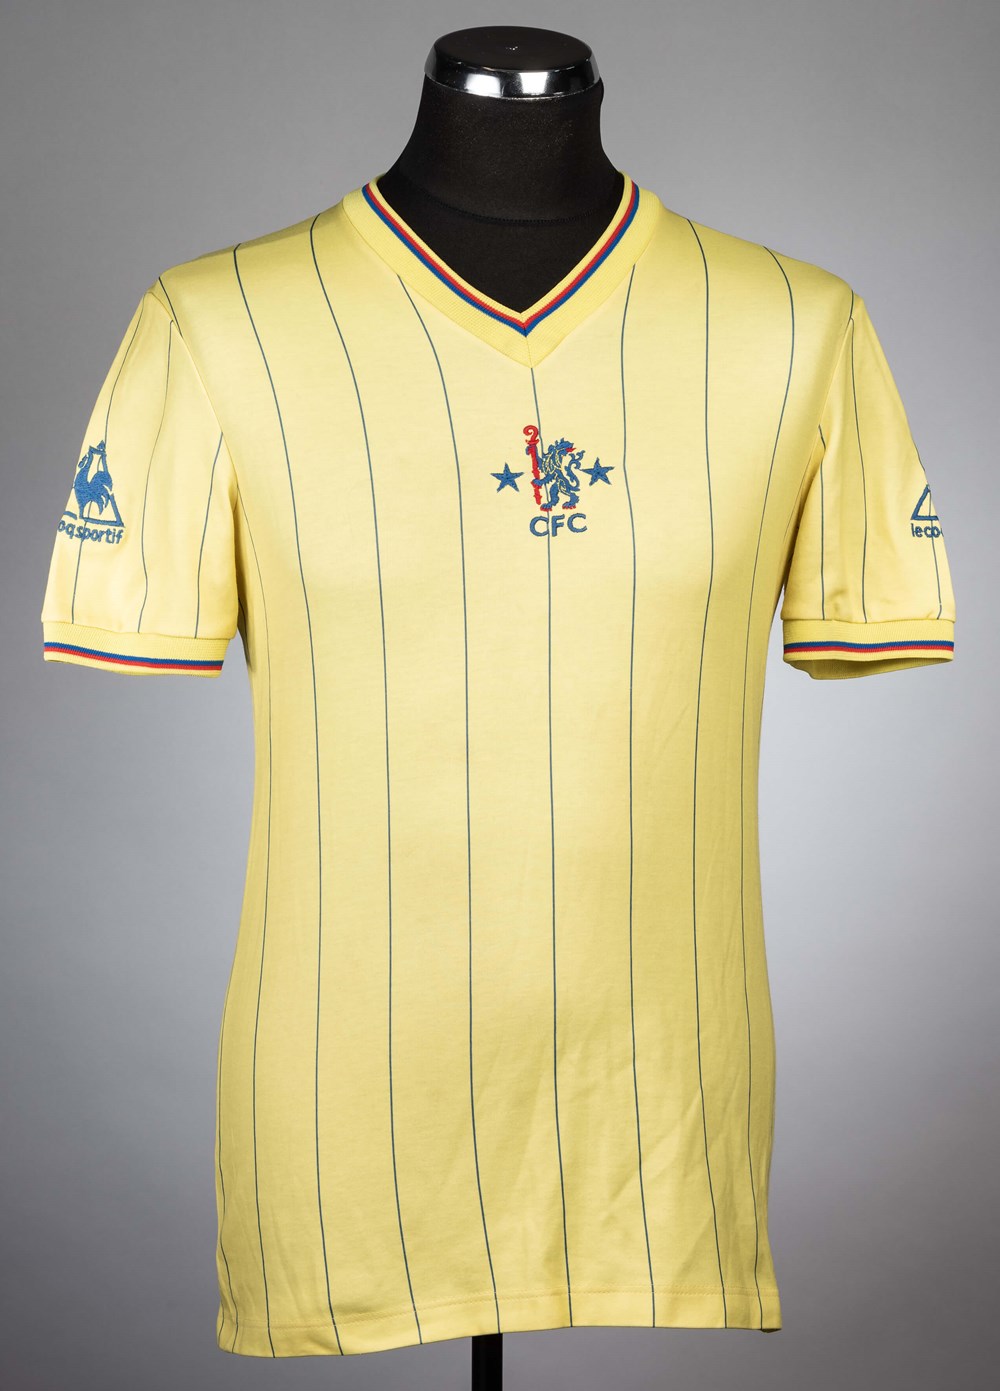 Clive Walker's 1983 match-worn Chelsea FC no.11 jersey